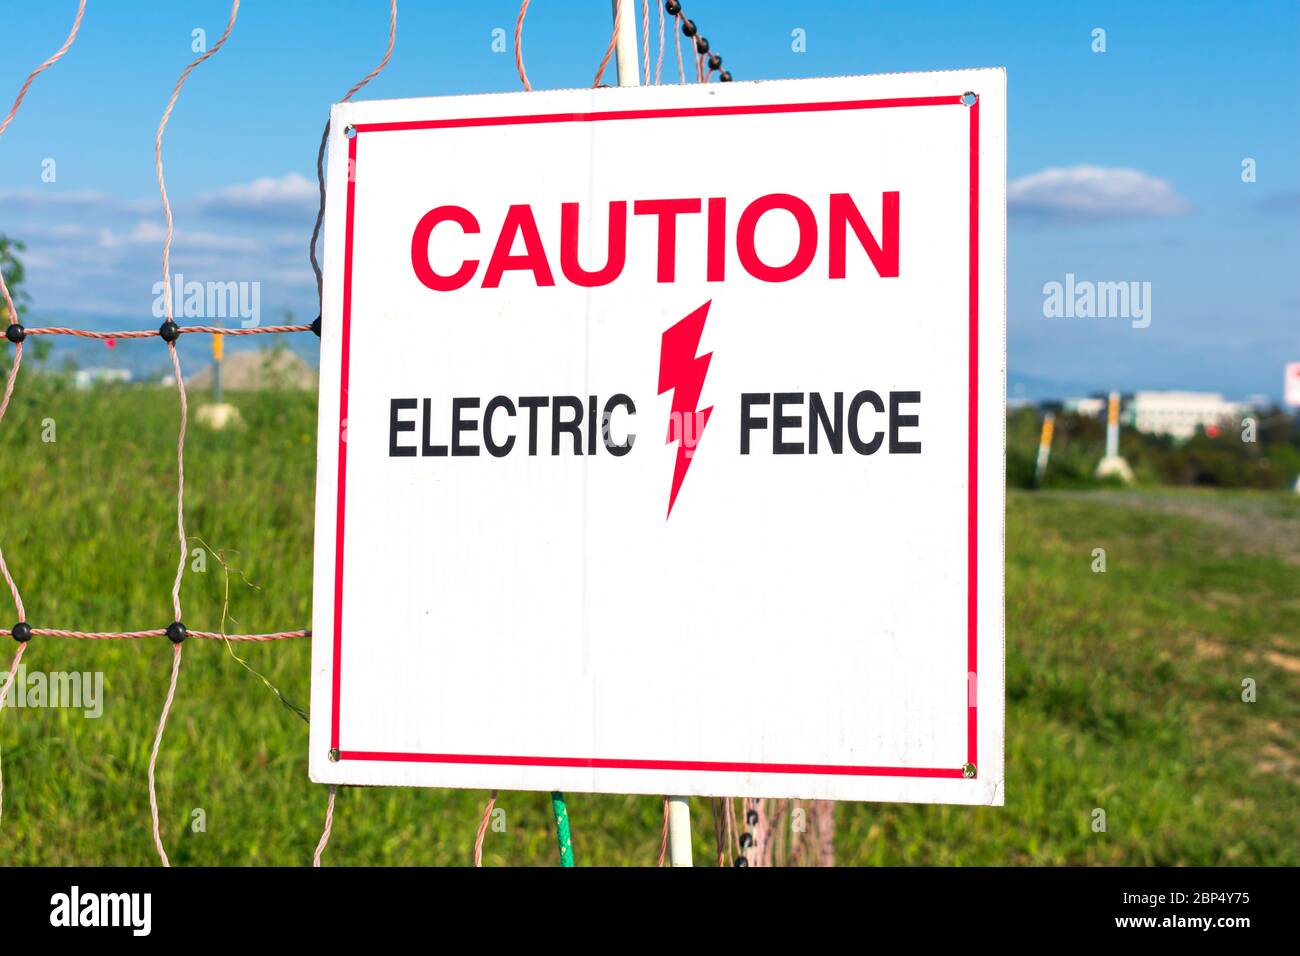 Caution Electric Fence warning sign makes people aware of the electrified fence. Stock Photo